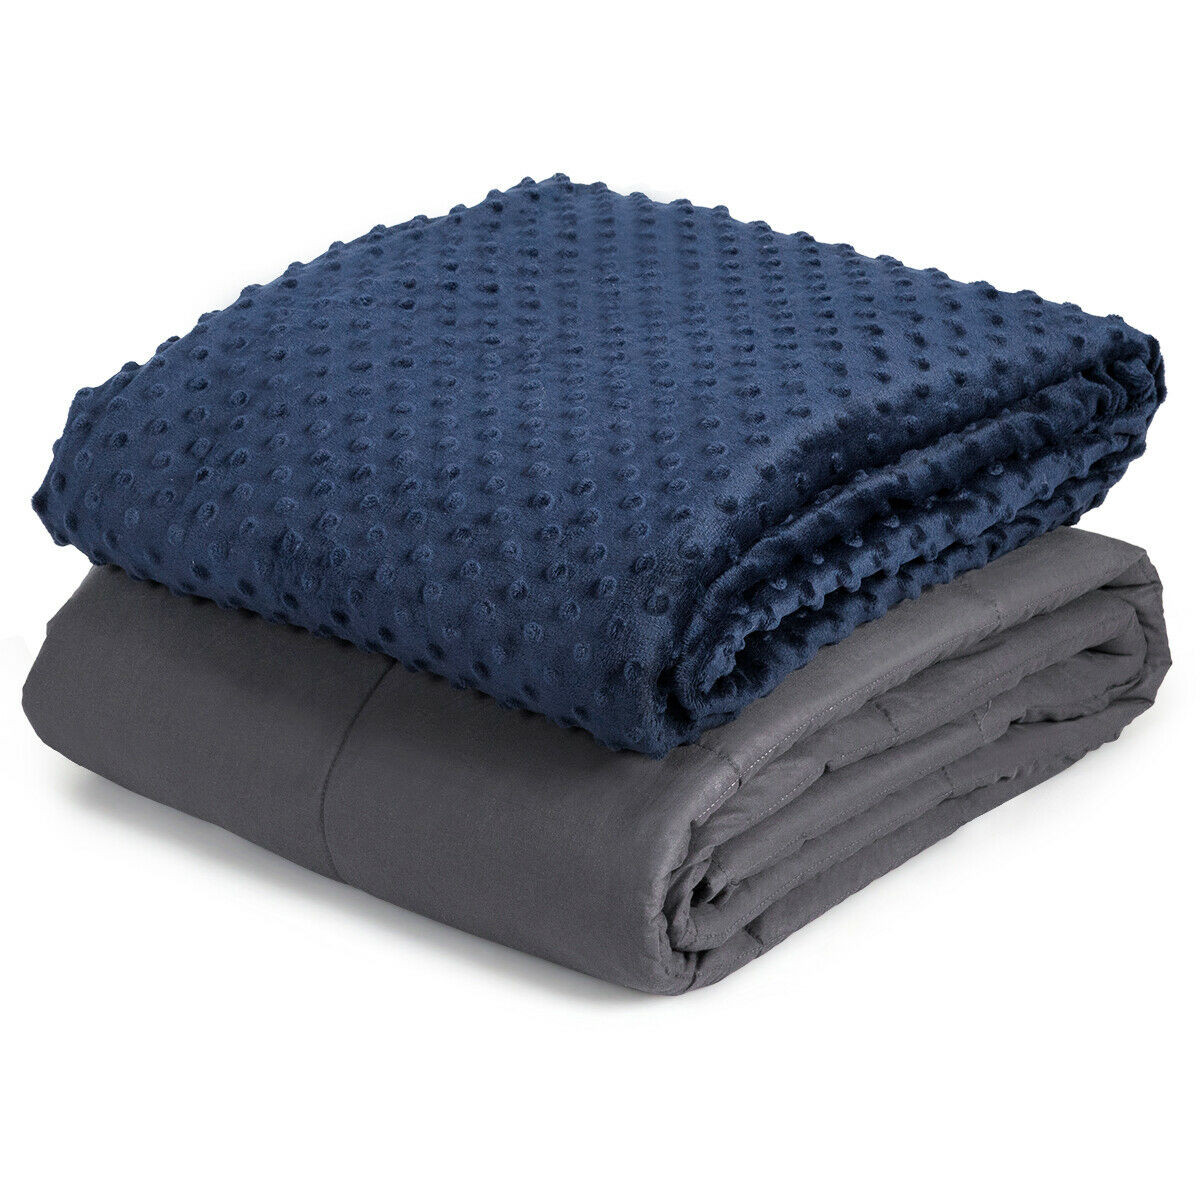 20 lbs 60 In. x 80 In. Super Soft Crystal Weighted Blanket